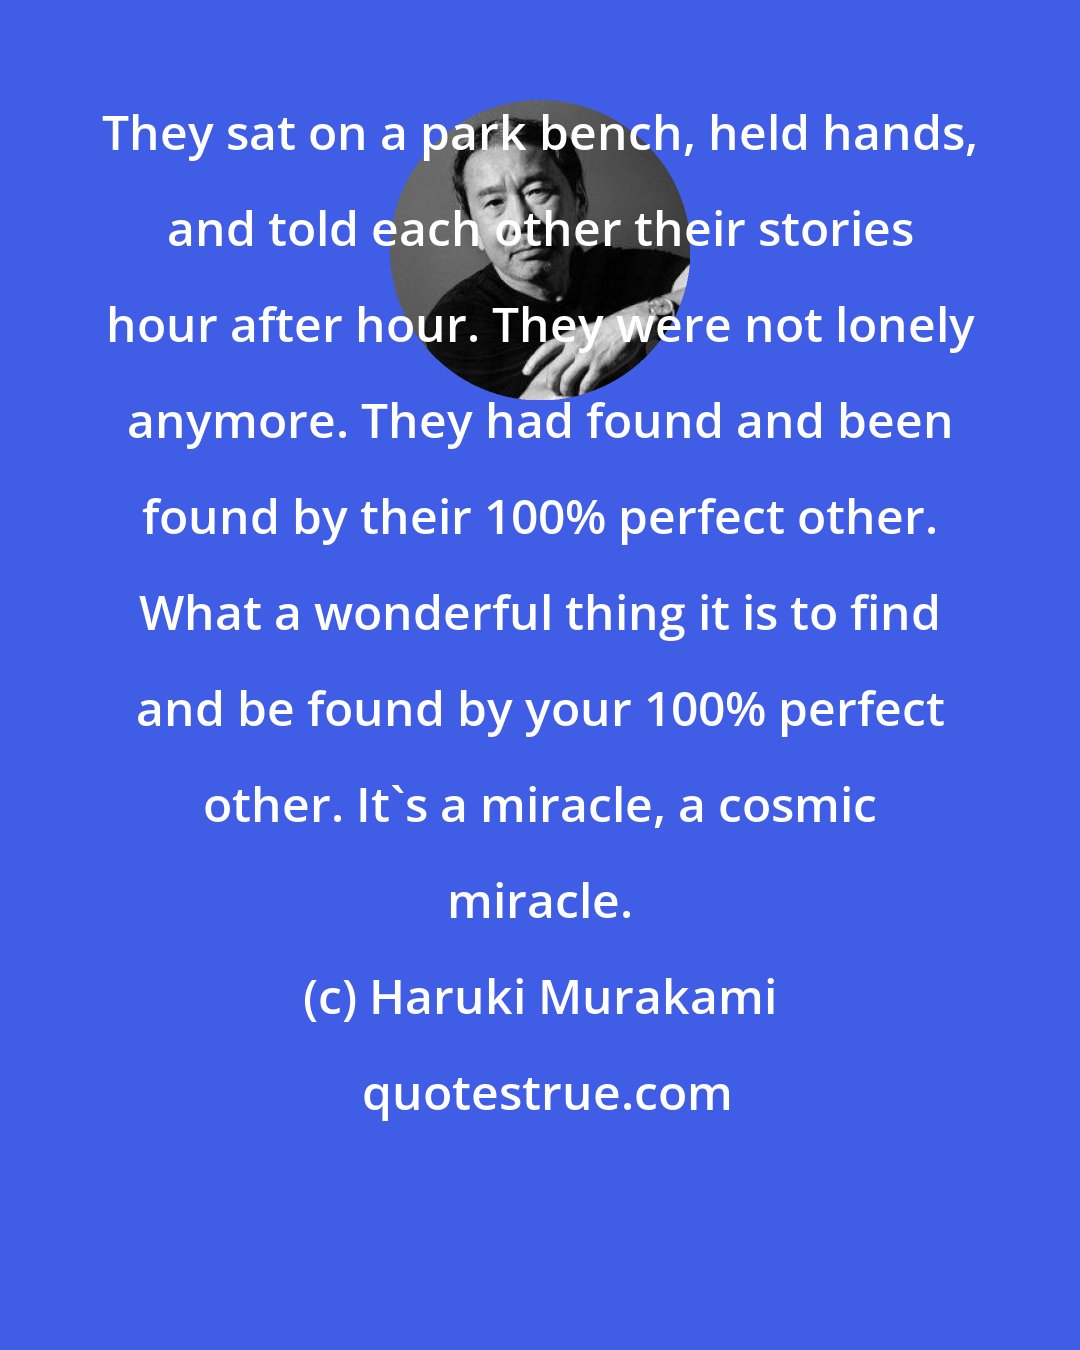 Haruki Murakami: They sat on a park bench, held hands, and told each other their stories hour after hour. They were not lonely anymore. They had found and been found by their 100% perfect other. What a wonderful thing it is to find and be found by your 100% perfect other. It's a miracle, a cosmic miracle.